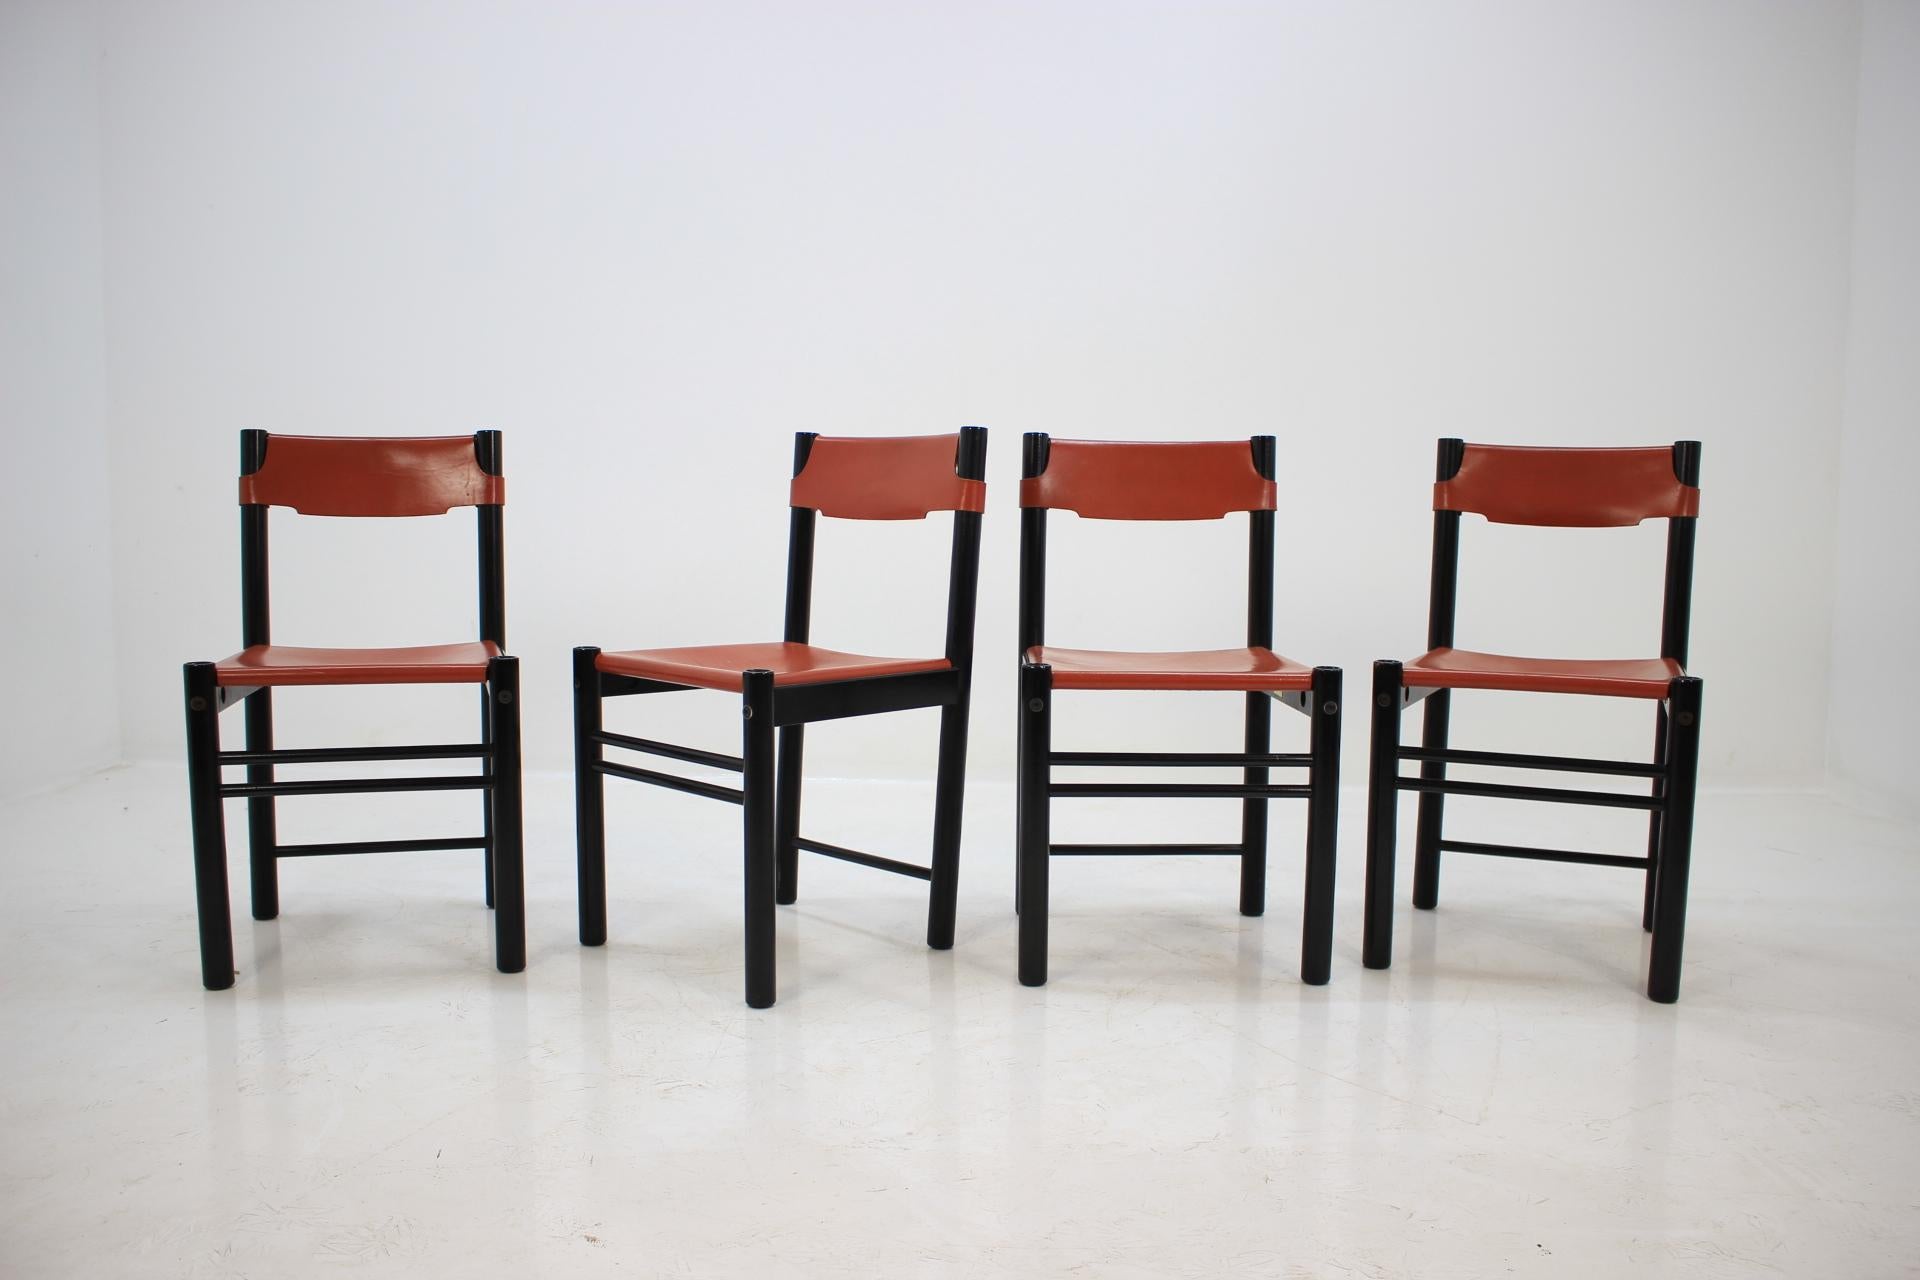 A set of four Italian leather on black wooden framed dining chairs. All are labeled from manufacturer. Good original condition.